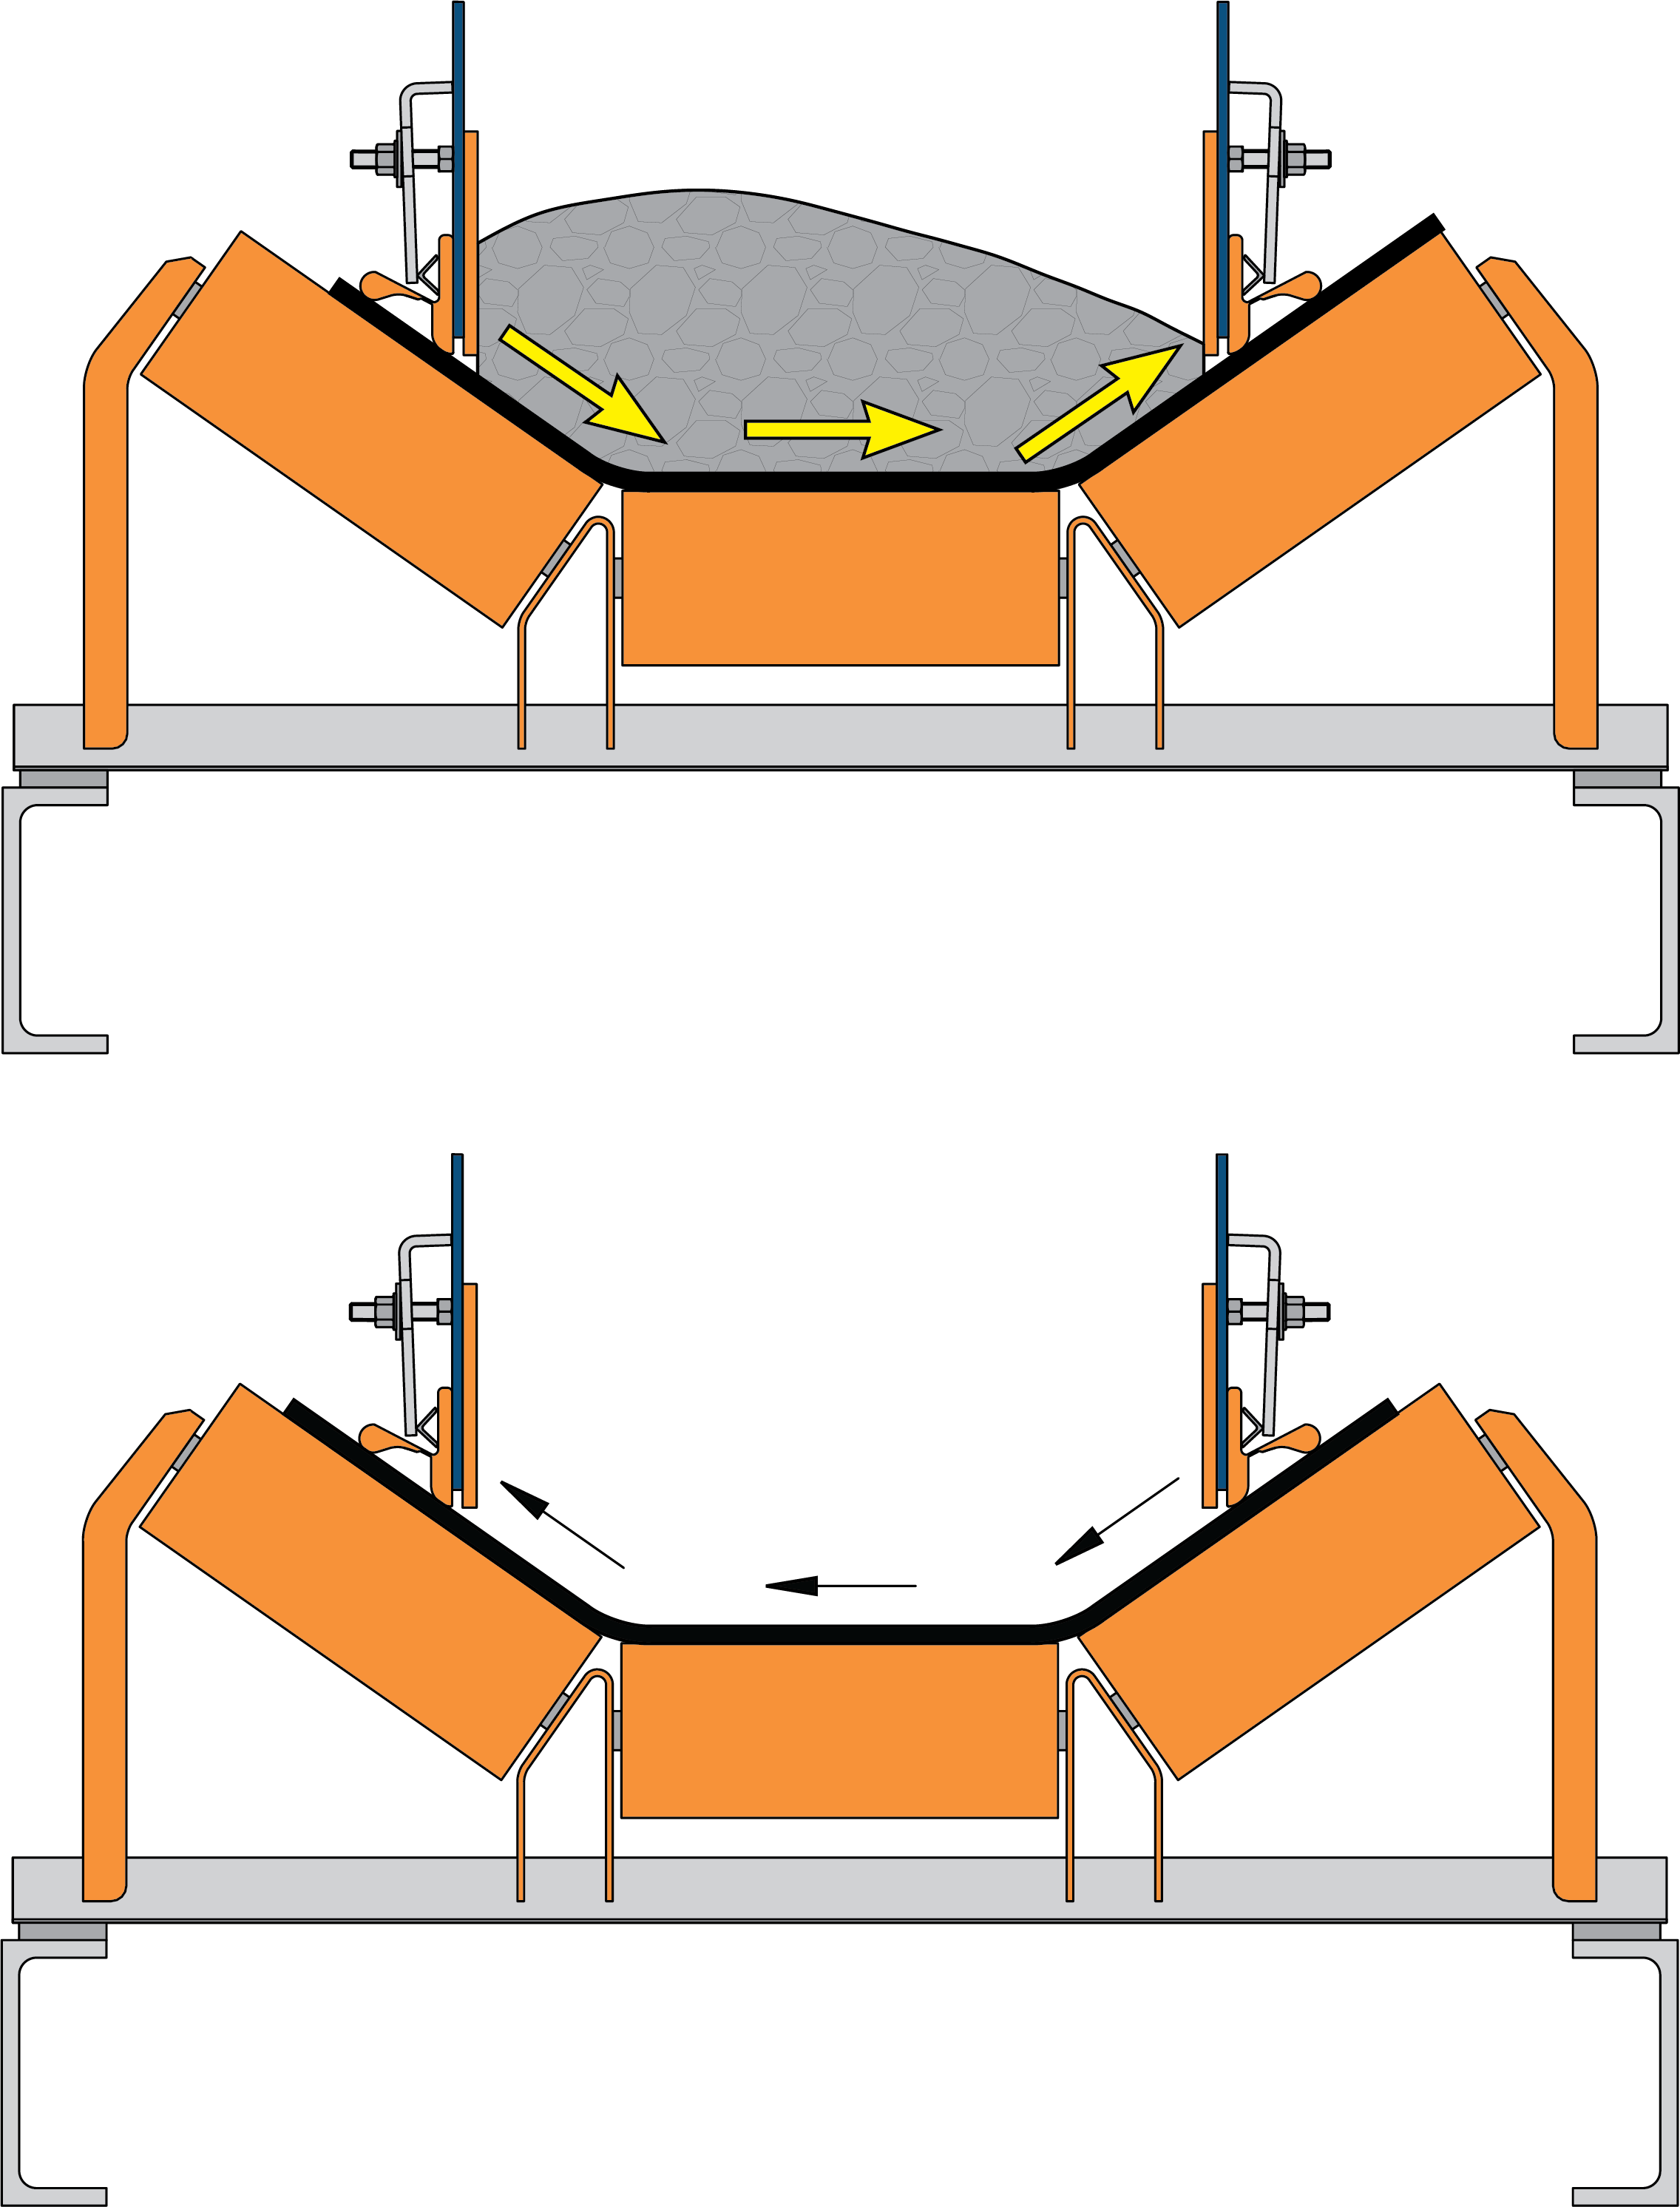 A 2-D illustration showing material that was not center loaded and the direction it pushes the belt.